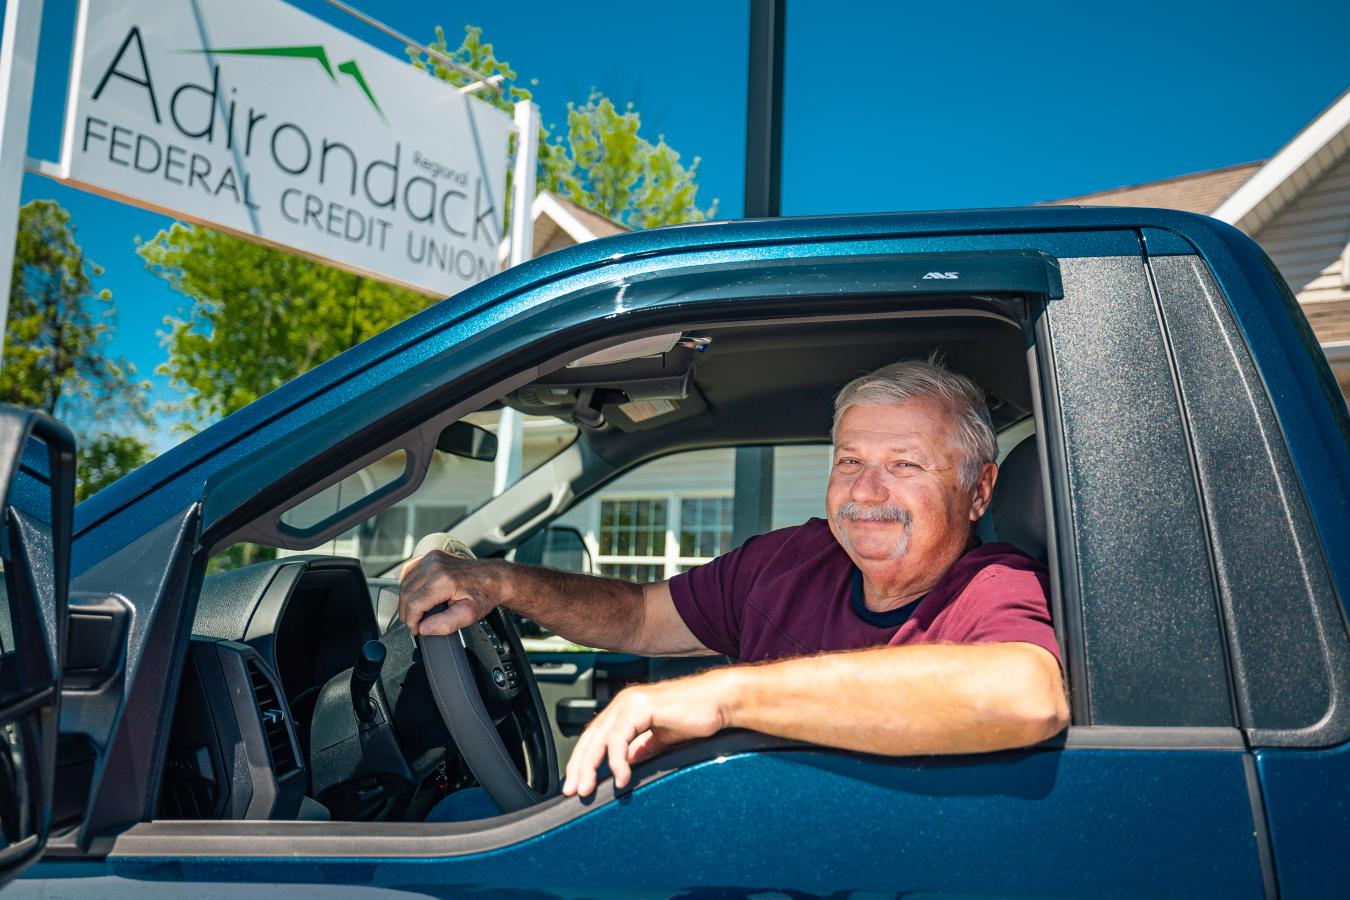 Credit Union member behind the wheel of his new truck that he purchased with a truck loan through Adirondack Regional Federal Credit Union